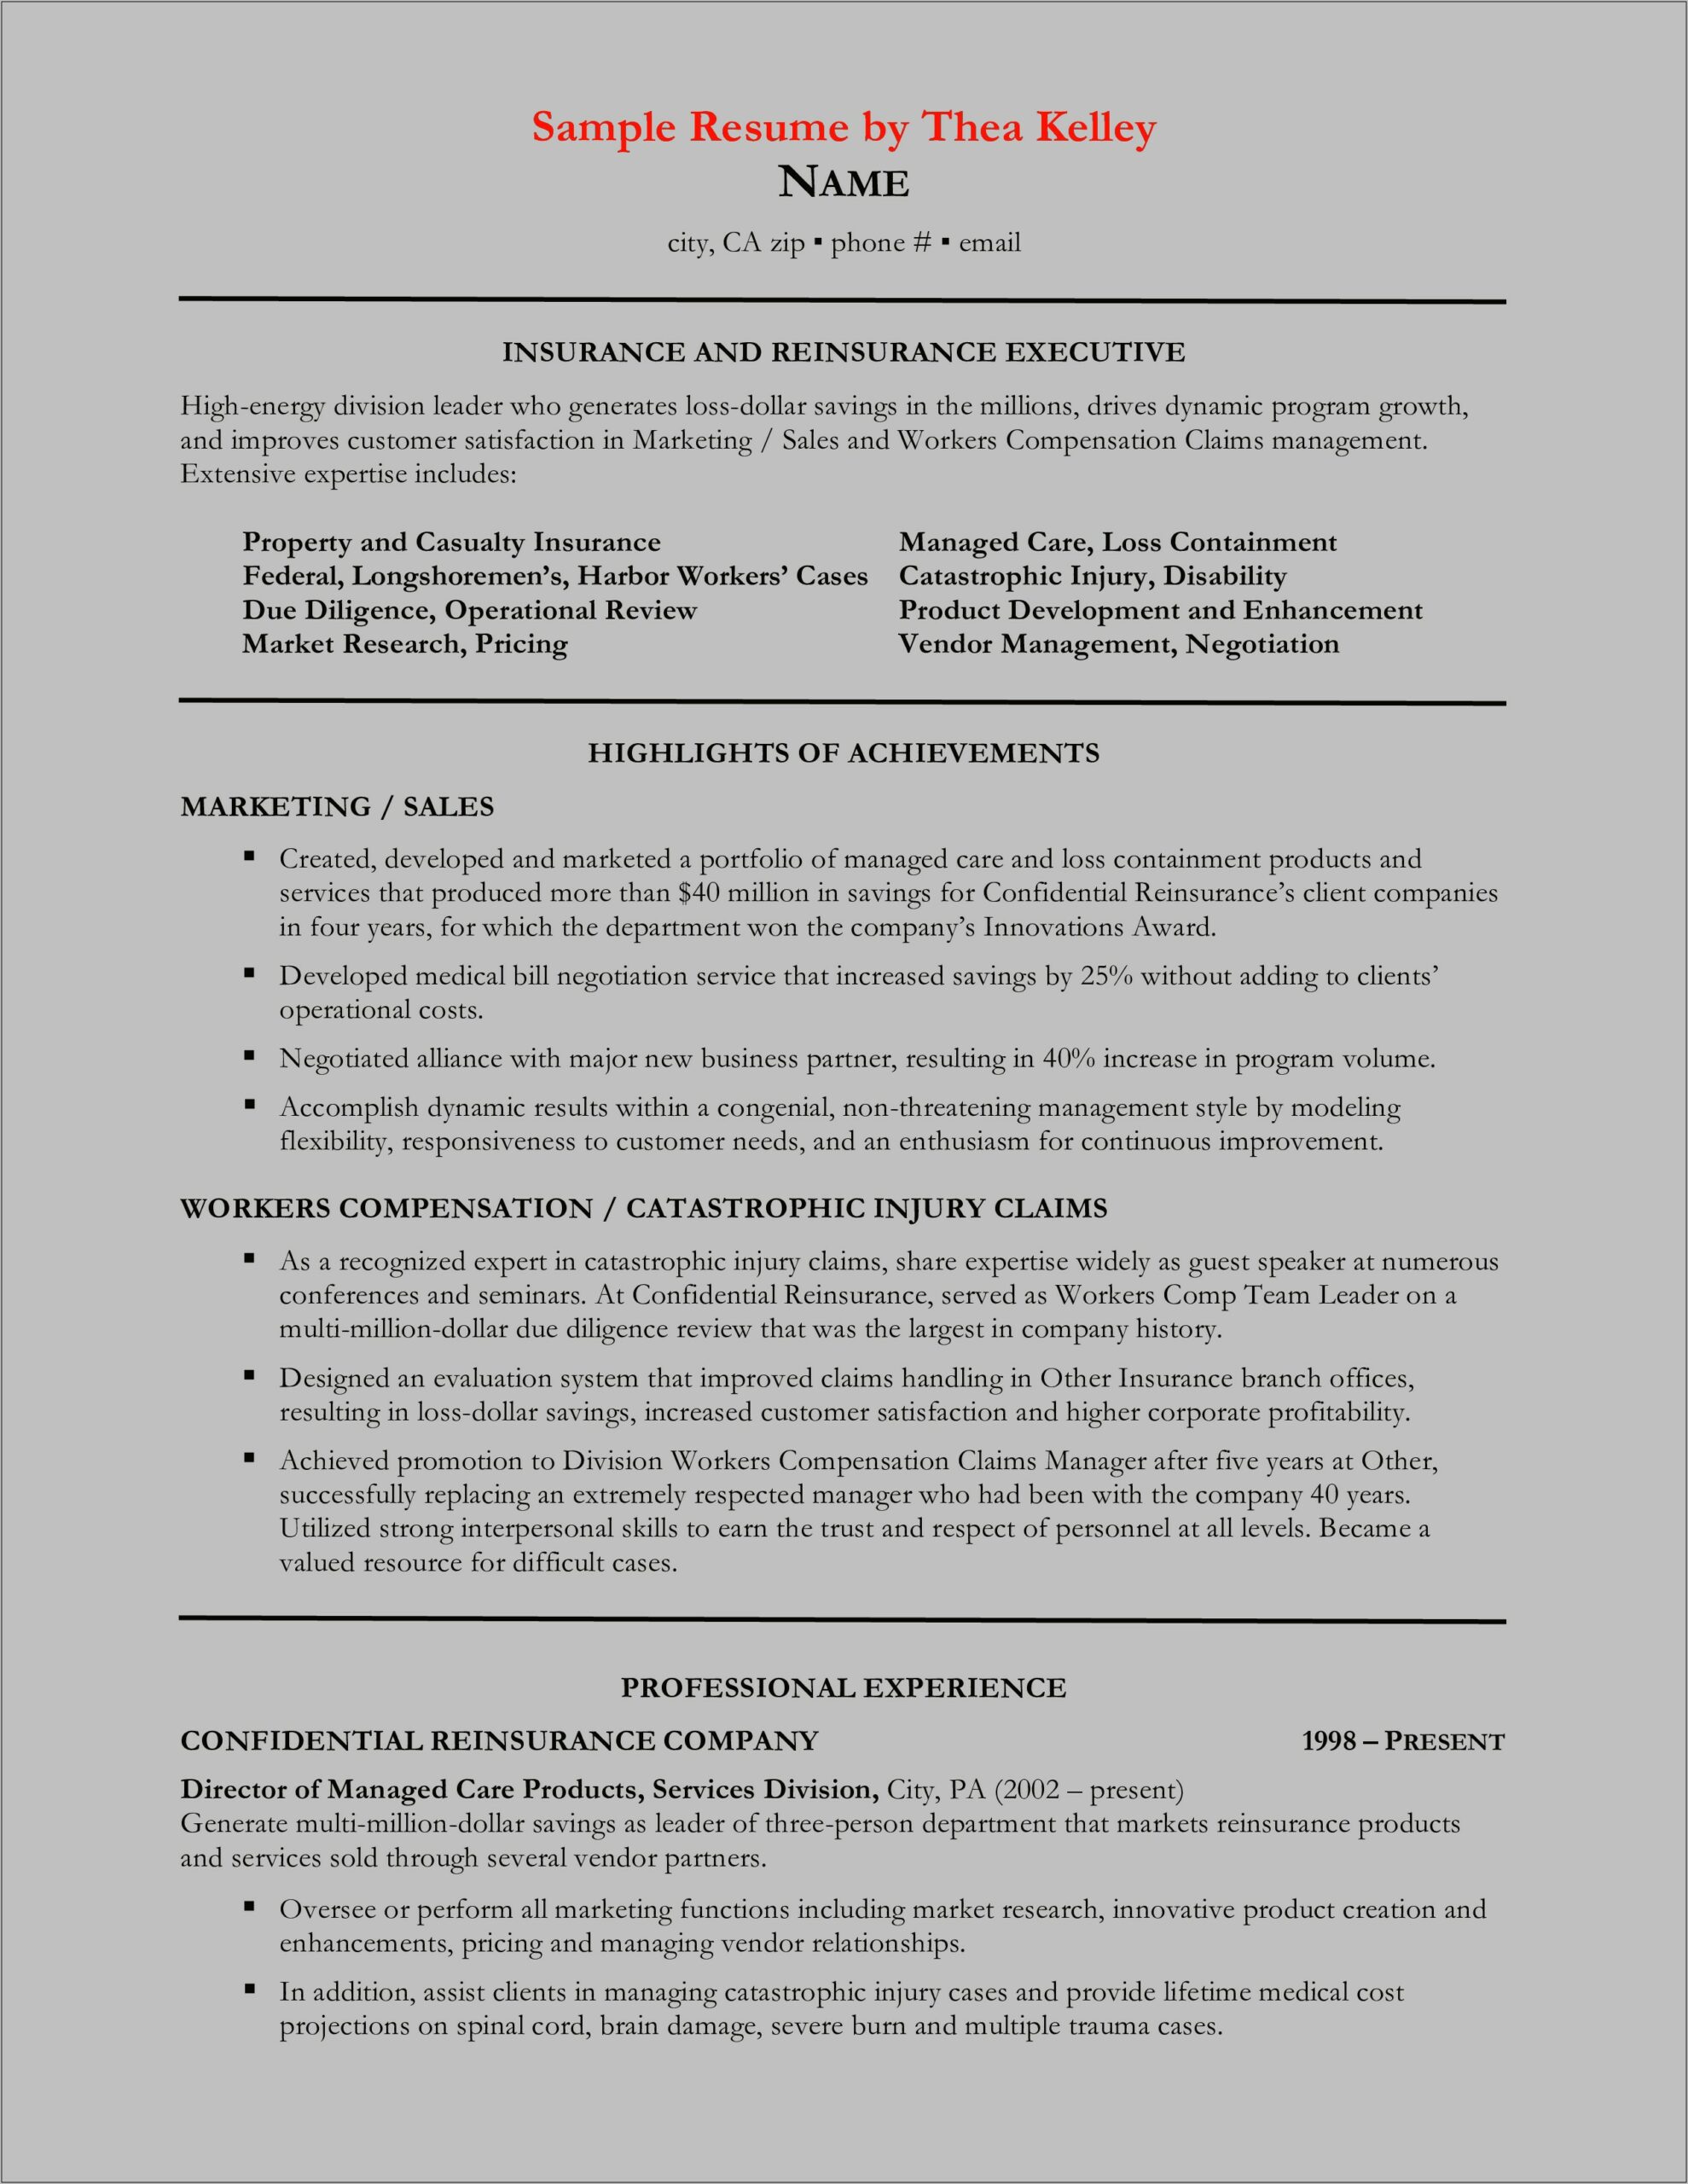 Insurance Sales Manager Resume Example